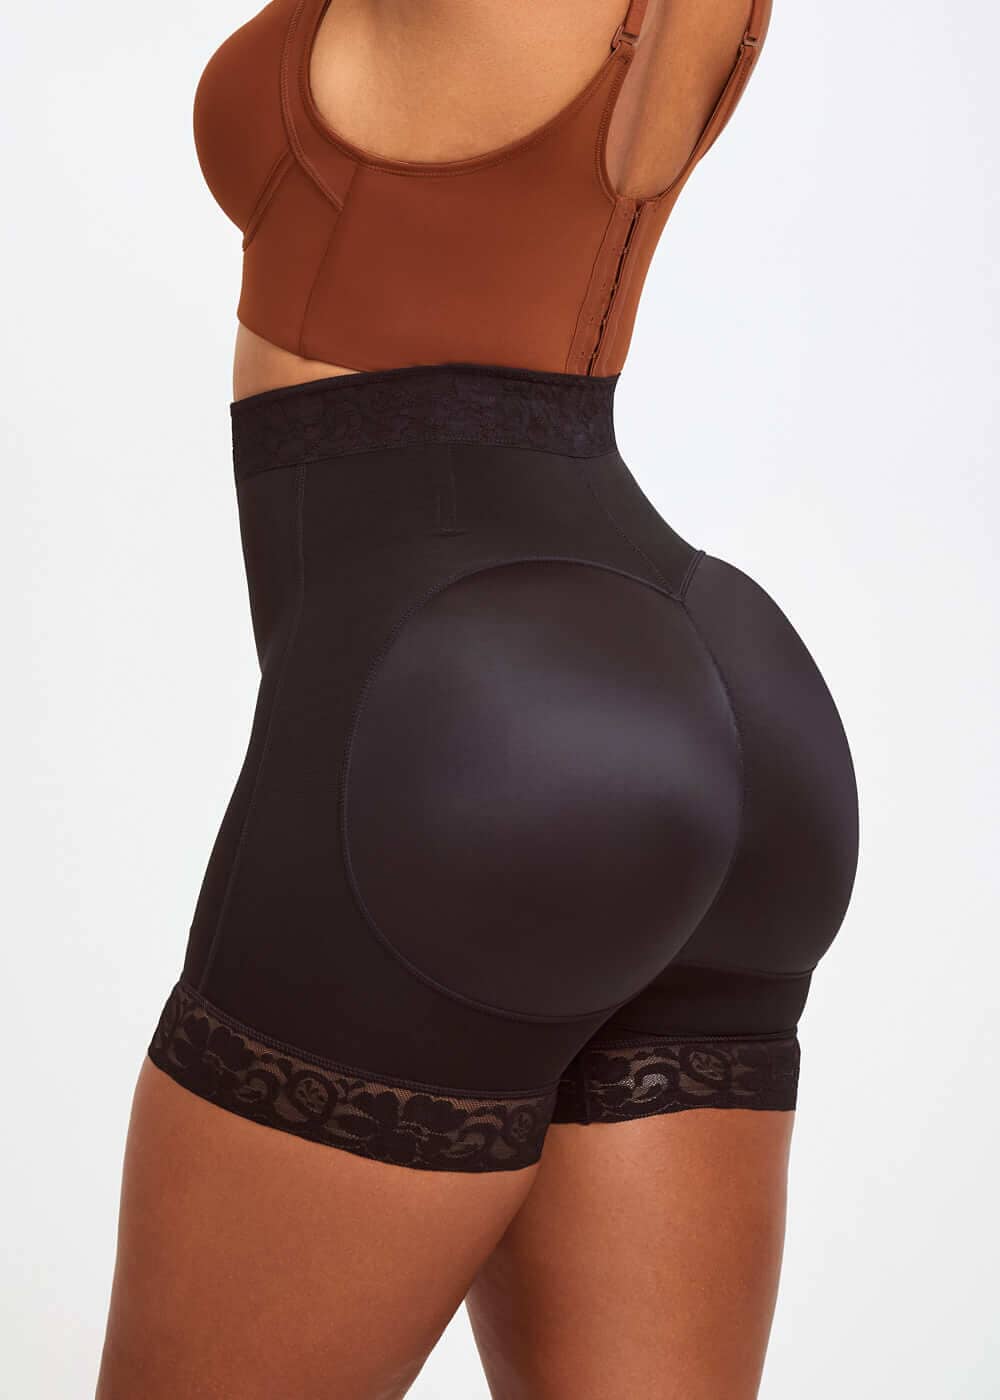 Butt Booty Lifting Shapewear Lifter Panties With Hip Algeria